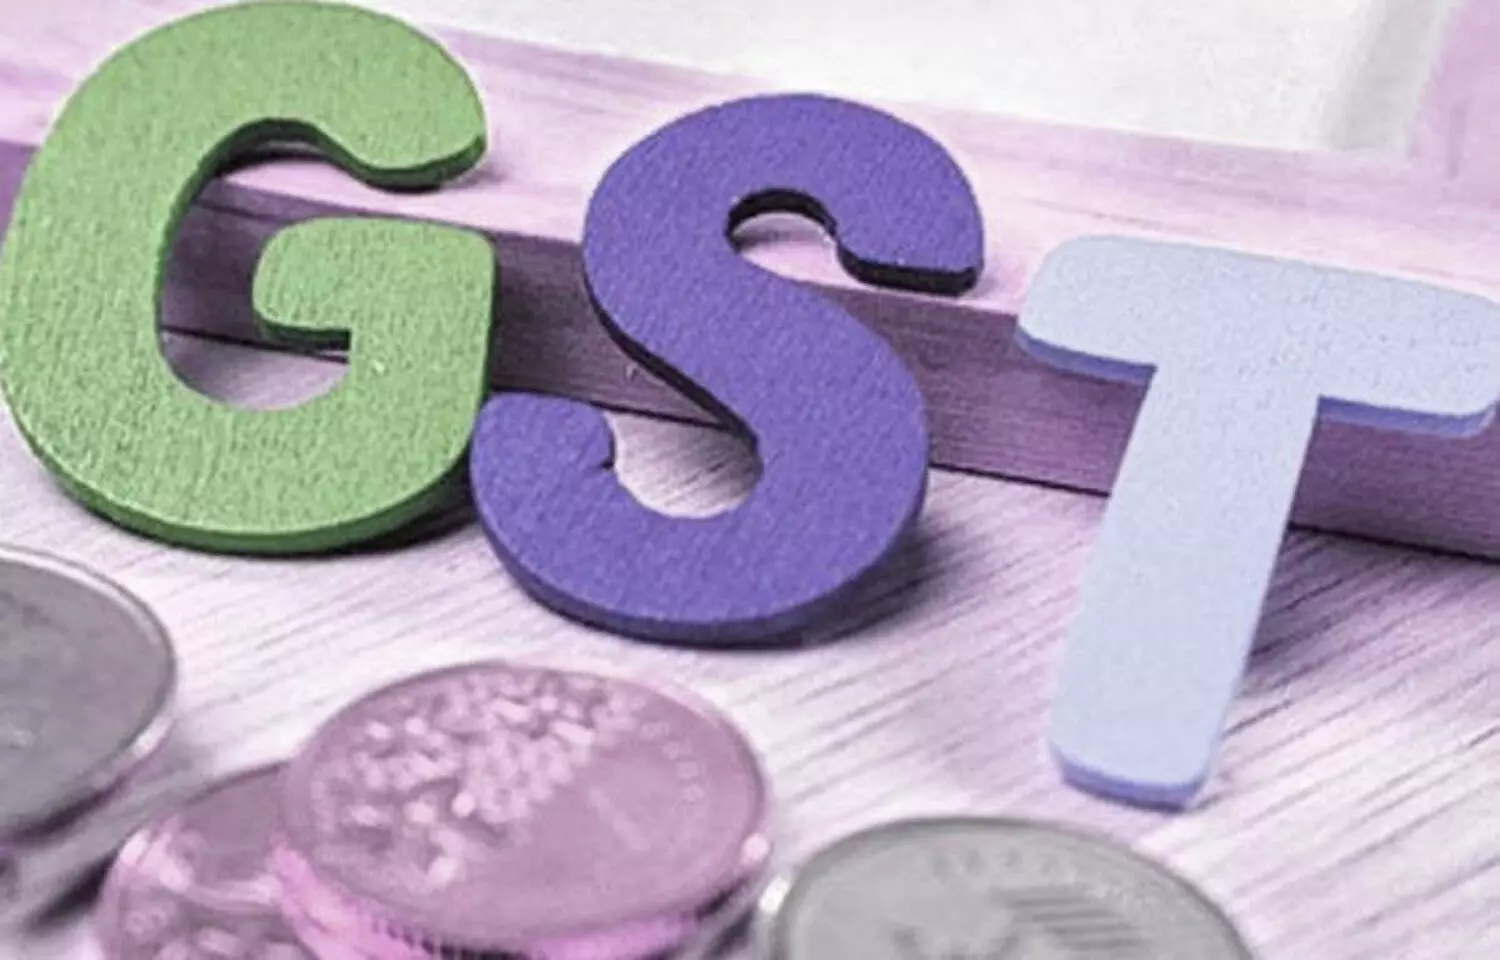 Membership healthcare service schemes by Multi-super speciality Hospital exempted from GST: Gujarat Authority for Advance Ruling